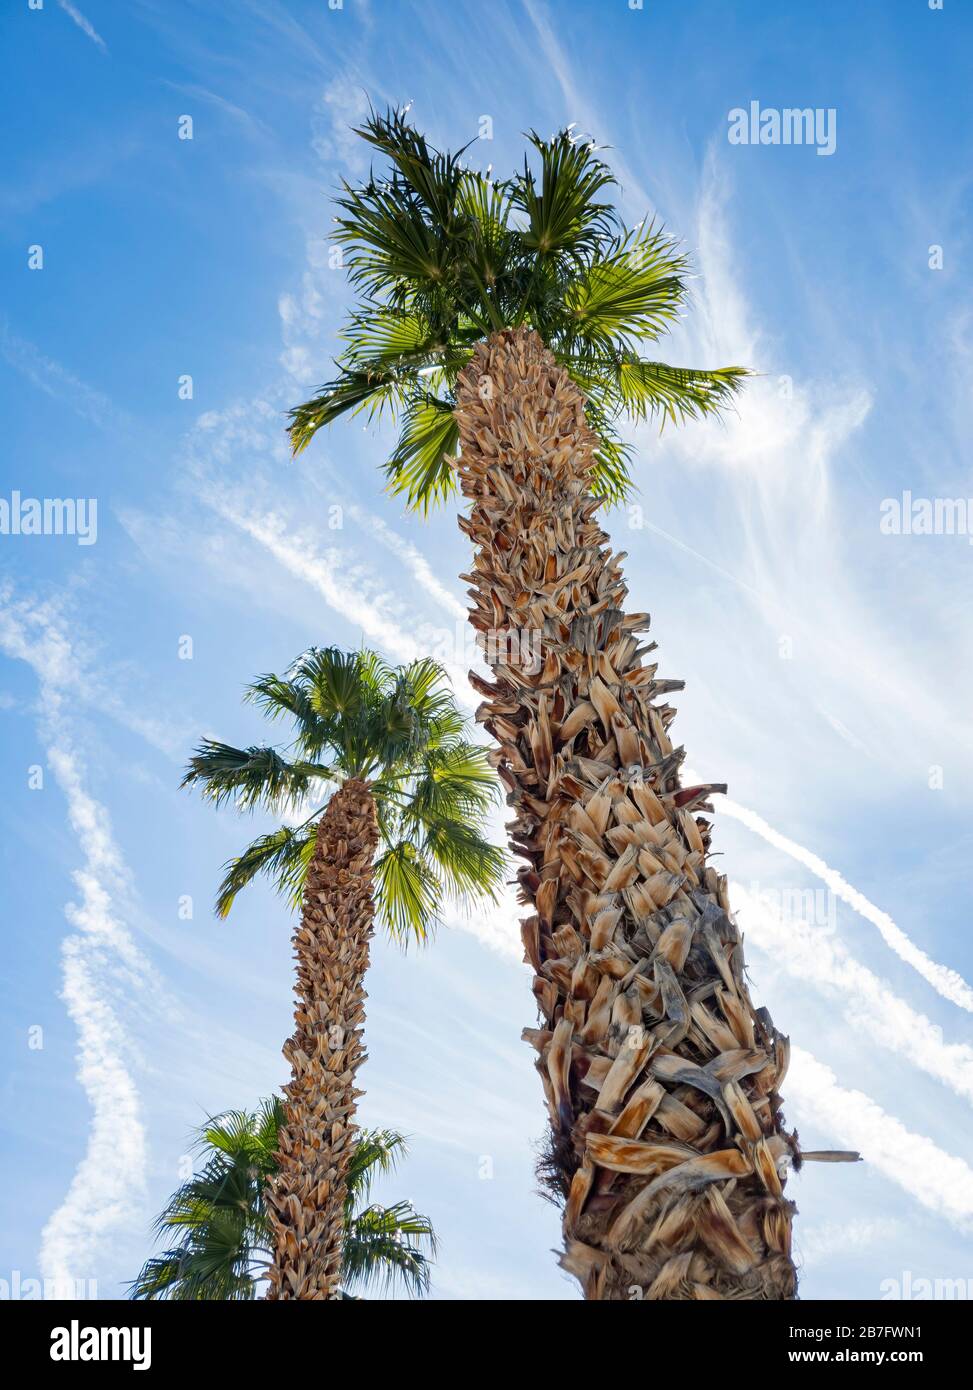 Looking up the palm tree with beautiful sky and clouds at Las Vegas, Nevada Stock Photo